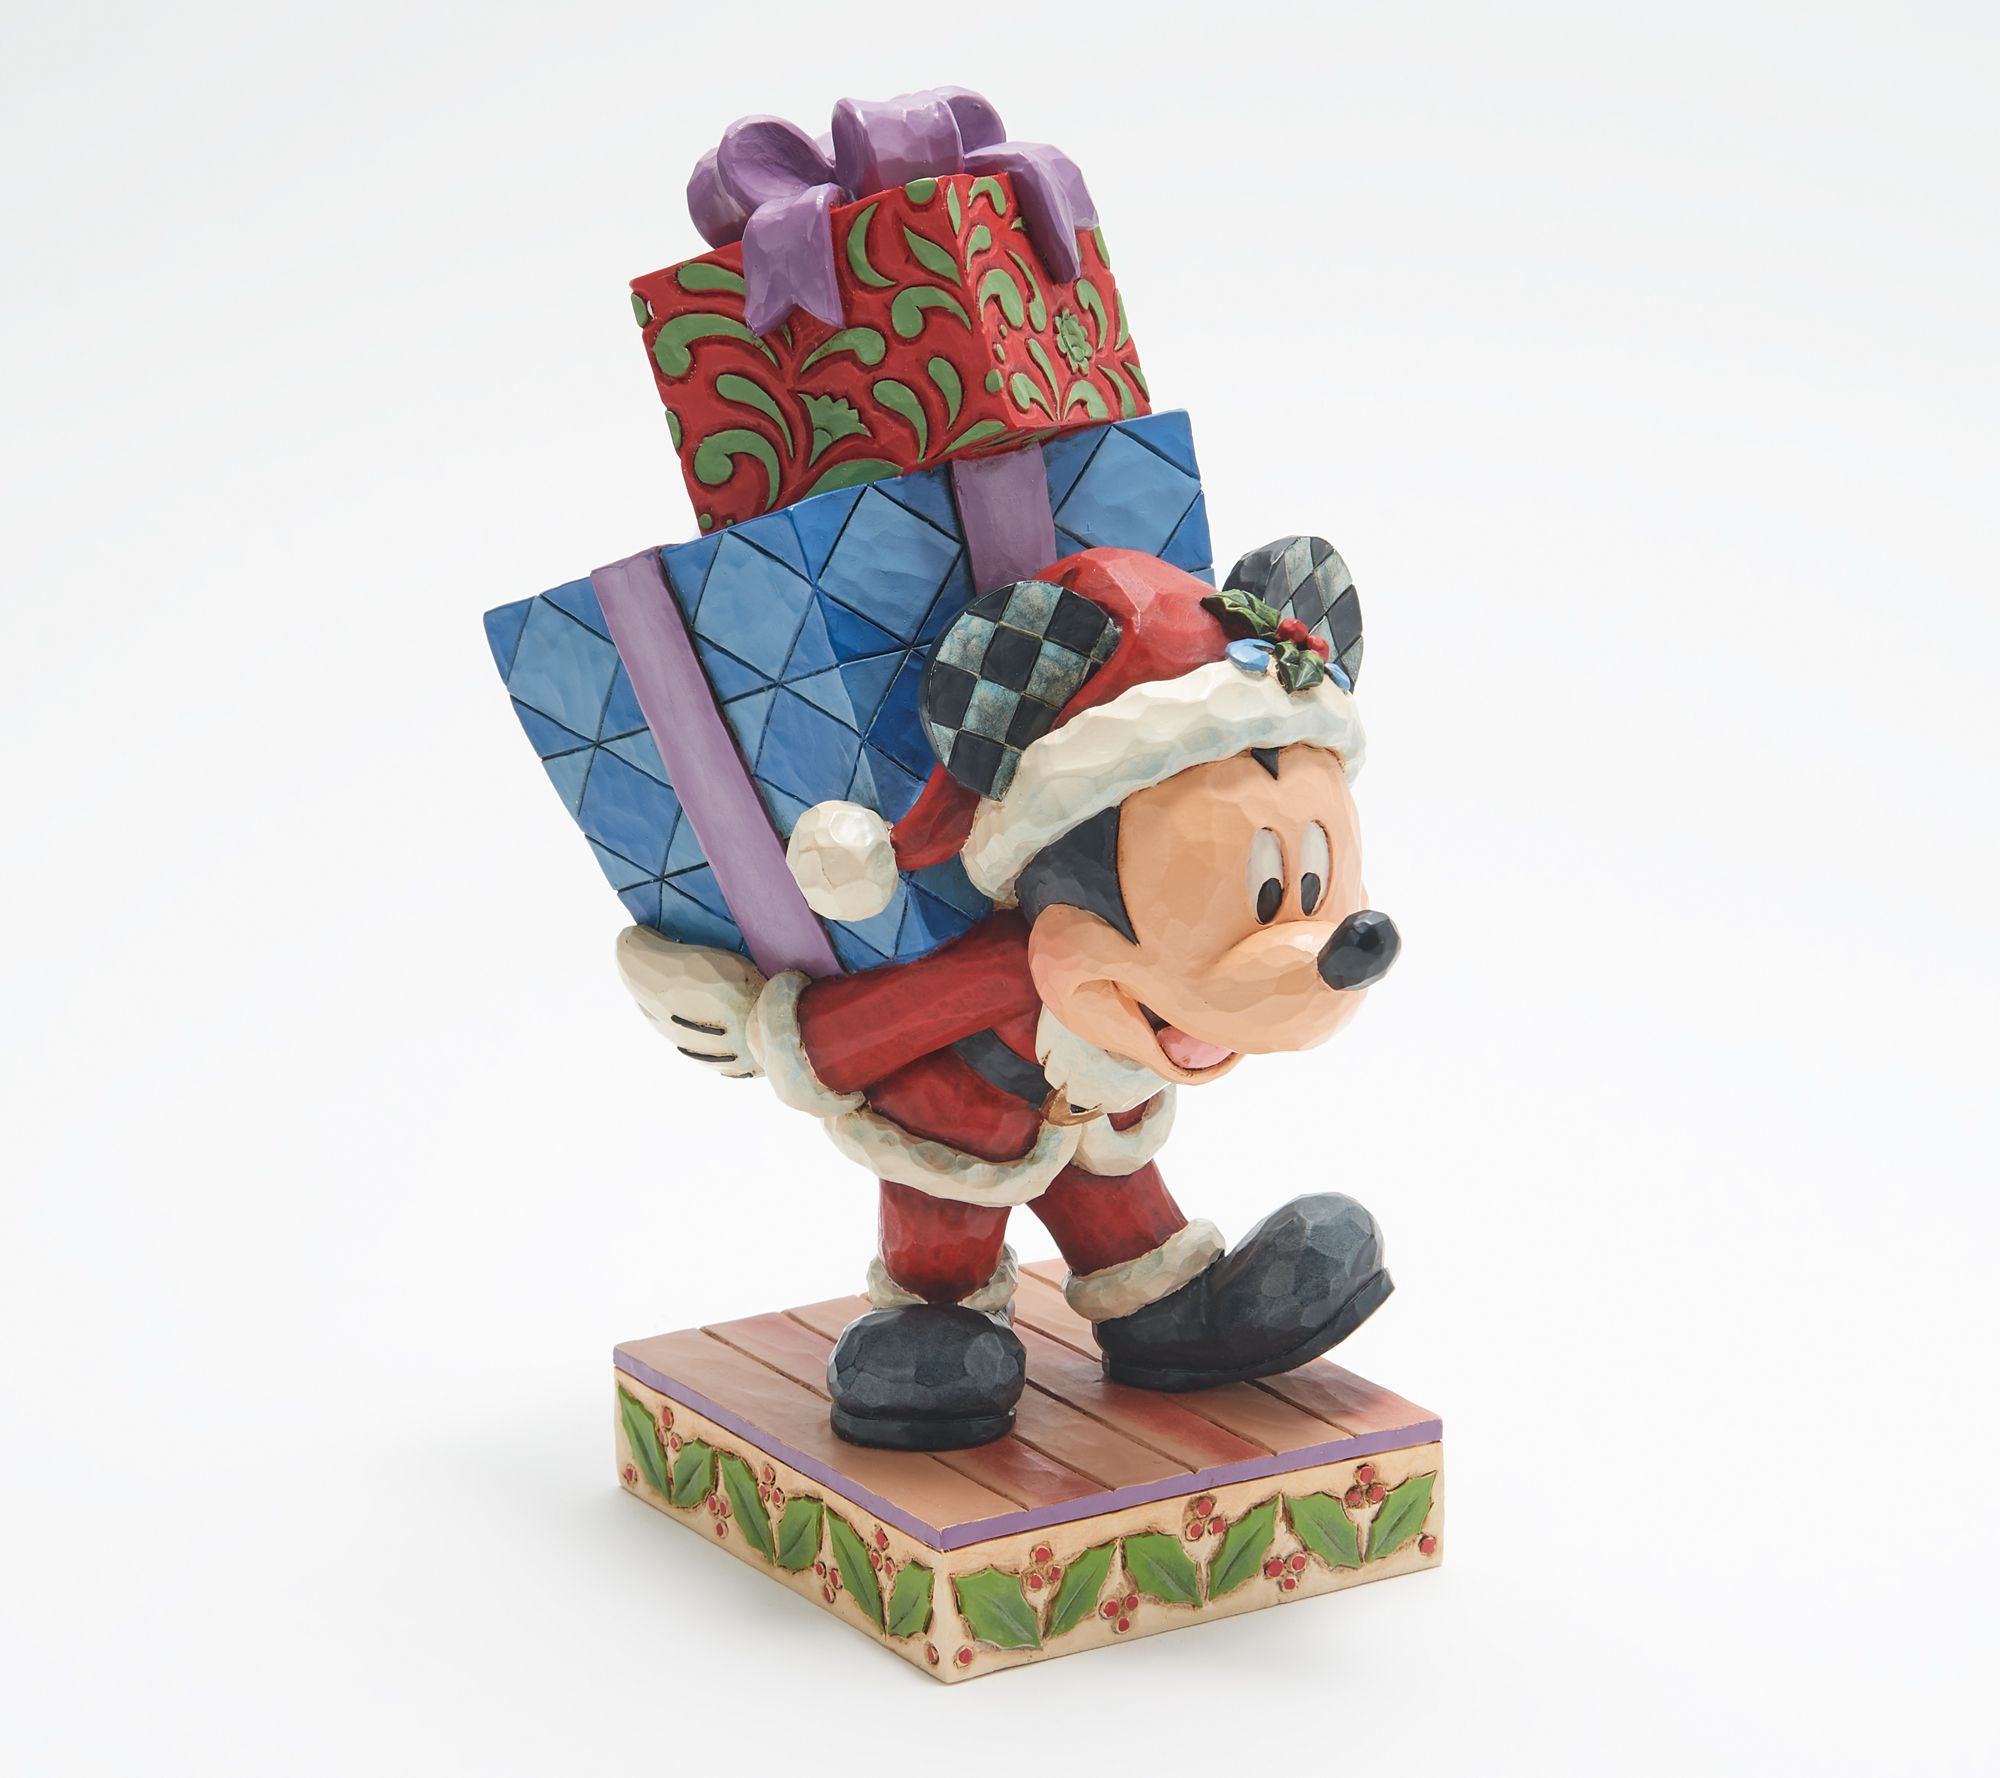 Jim Shore Disney Traditions Mickey Carrying Presents Figure 